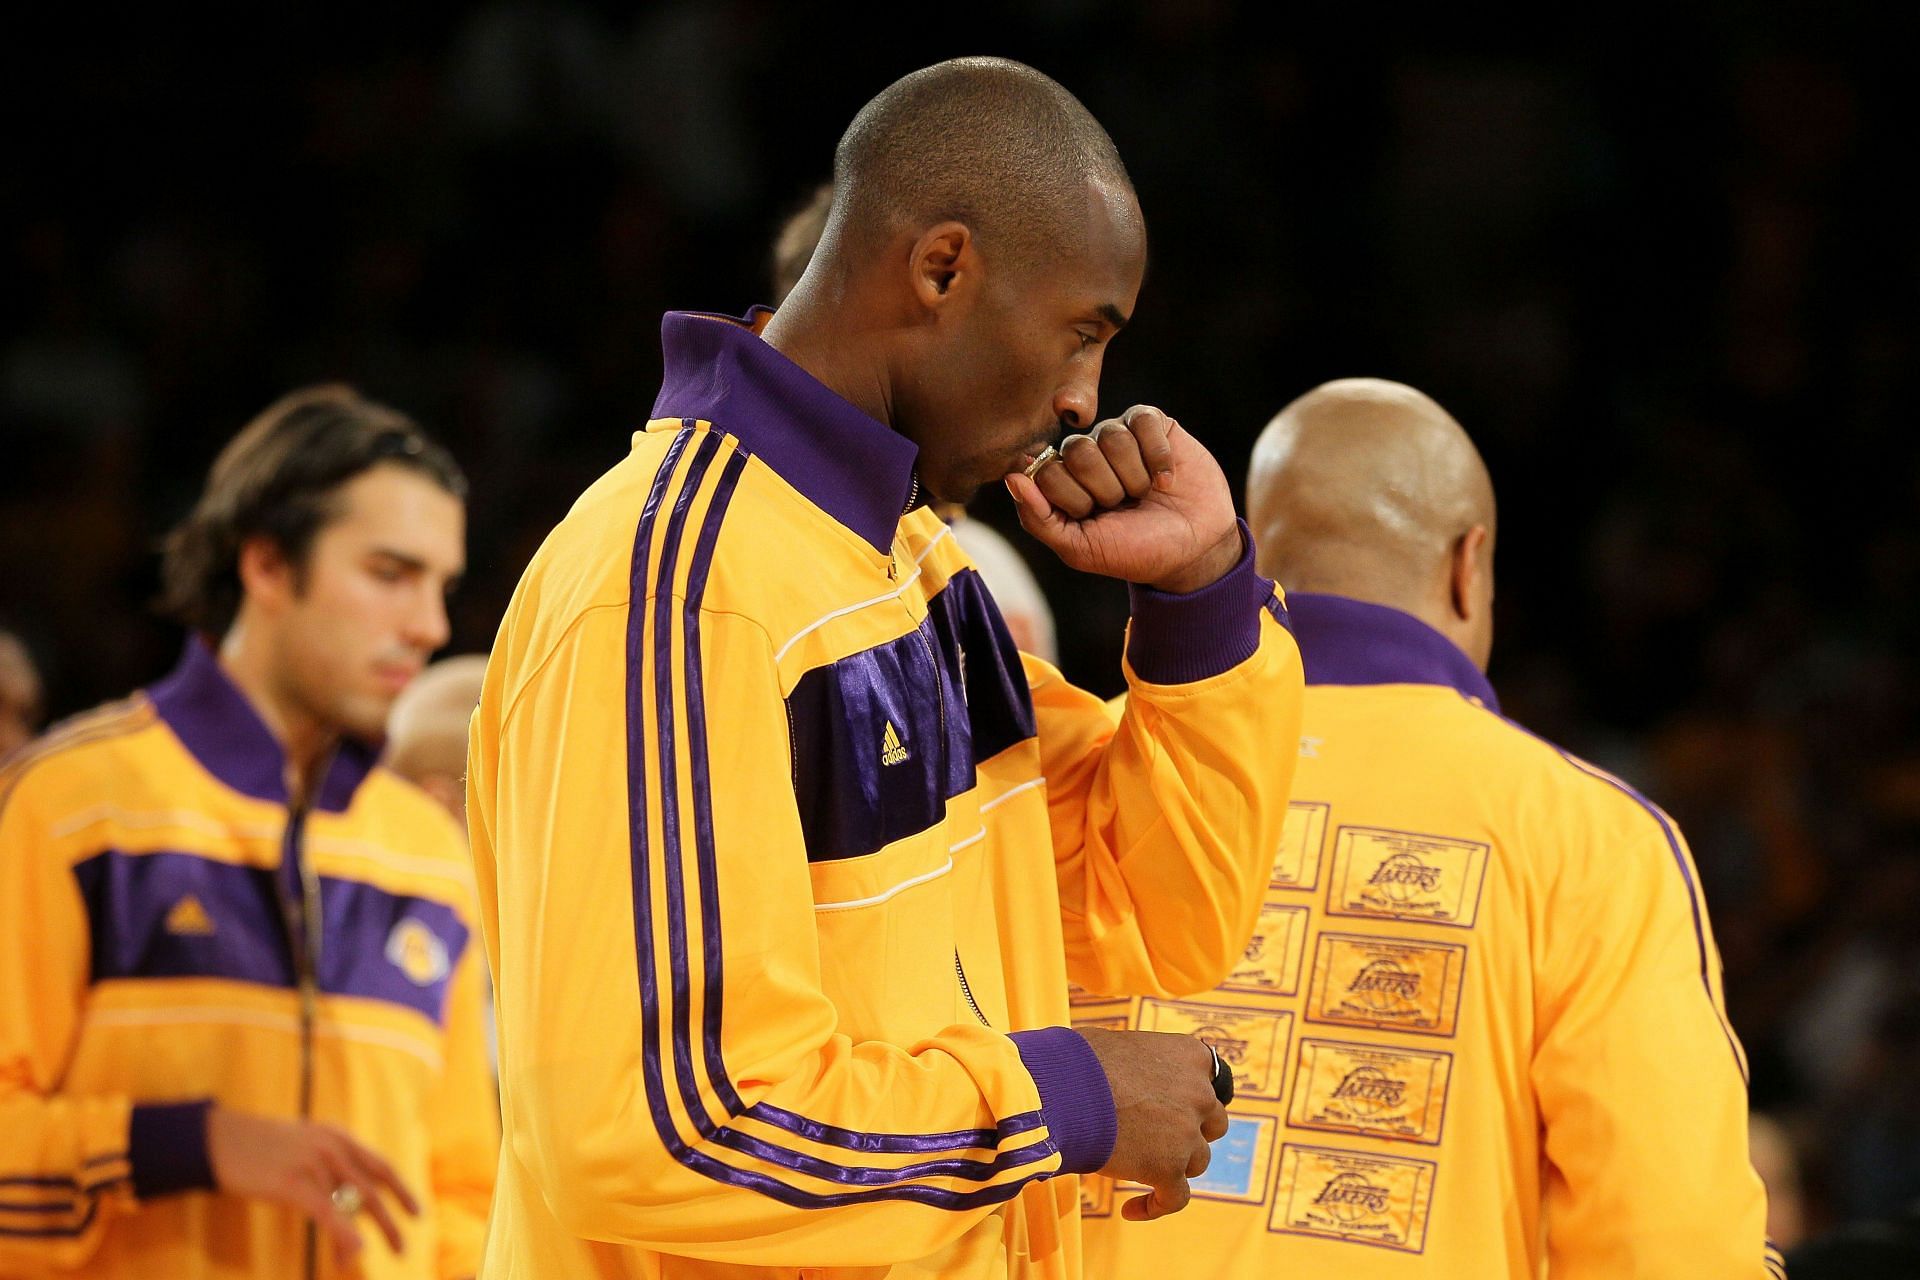 Kobe Bryant #24 of the Los Angeles Lakers kisses his 2009-2010 Championship Ring after the Lakers were given the rings during a ceremony prior to their opening night game against the Houston Rockets at Staples Center on October 26, 2010 in Los Angeles, California.